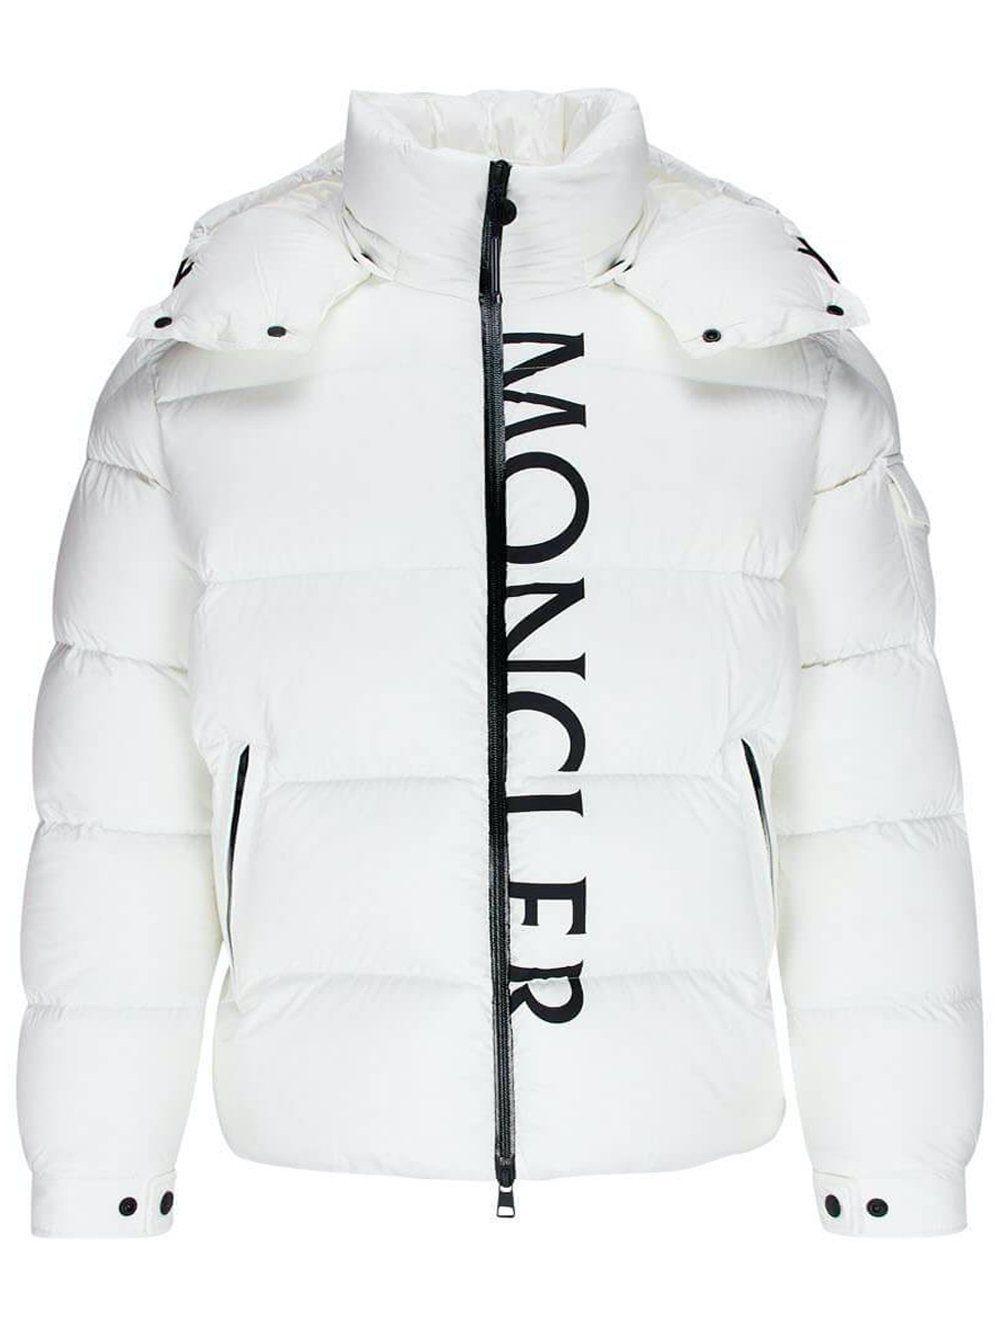 Moncler Synthetic Padded Maures Jacket in White for Men - Save 20% - Lyst